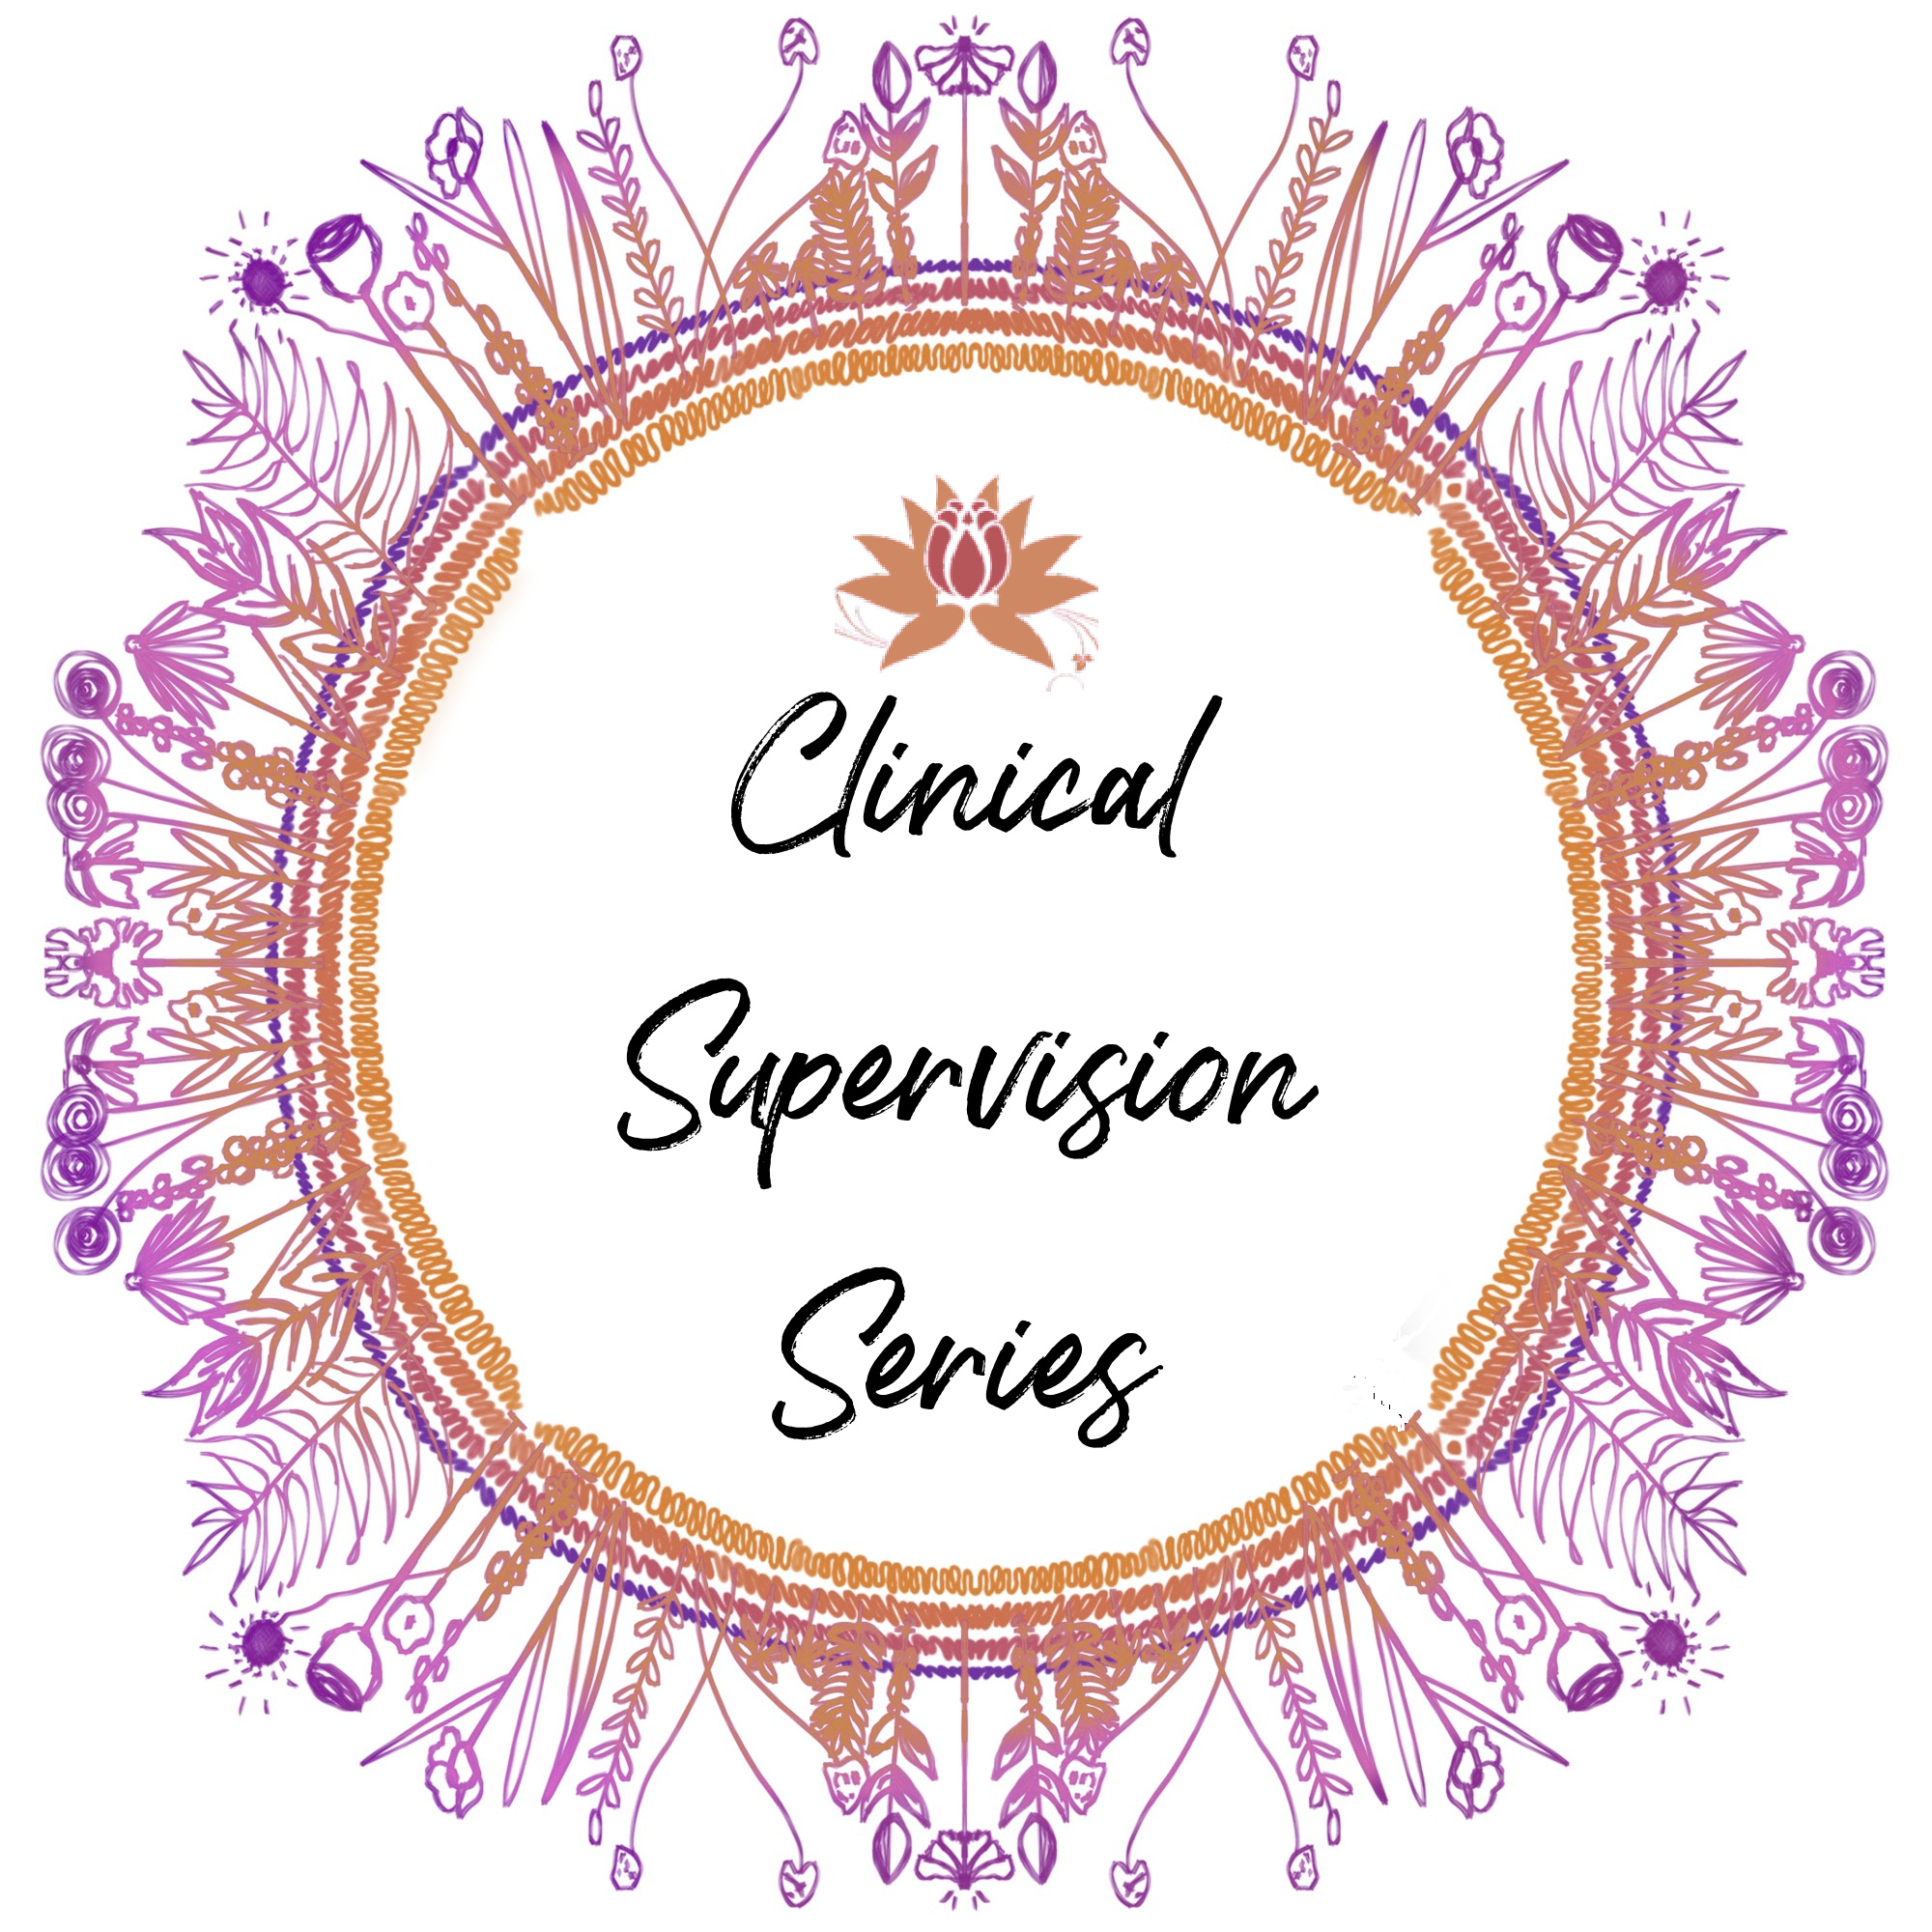 clinical supervision series ACS